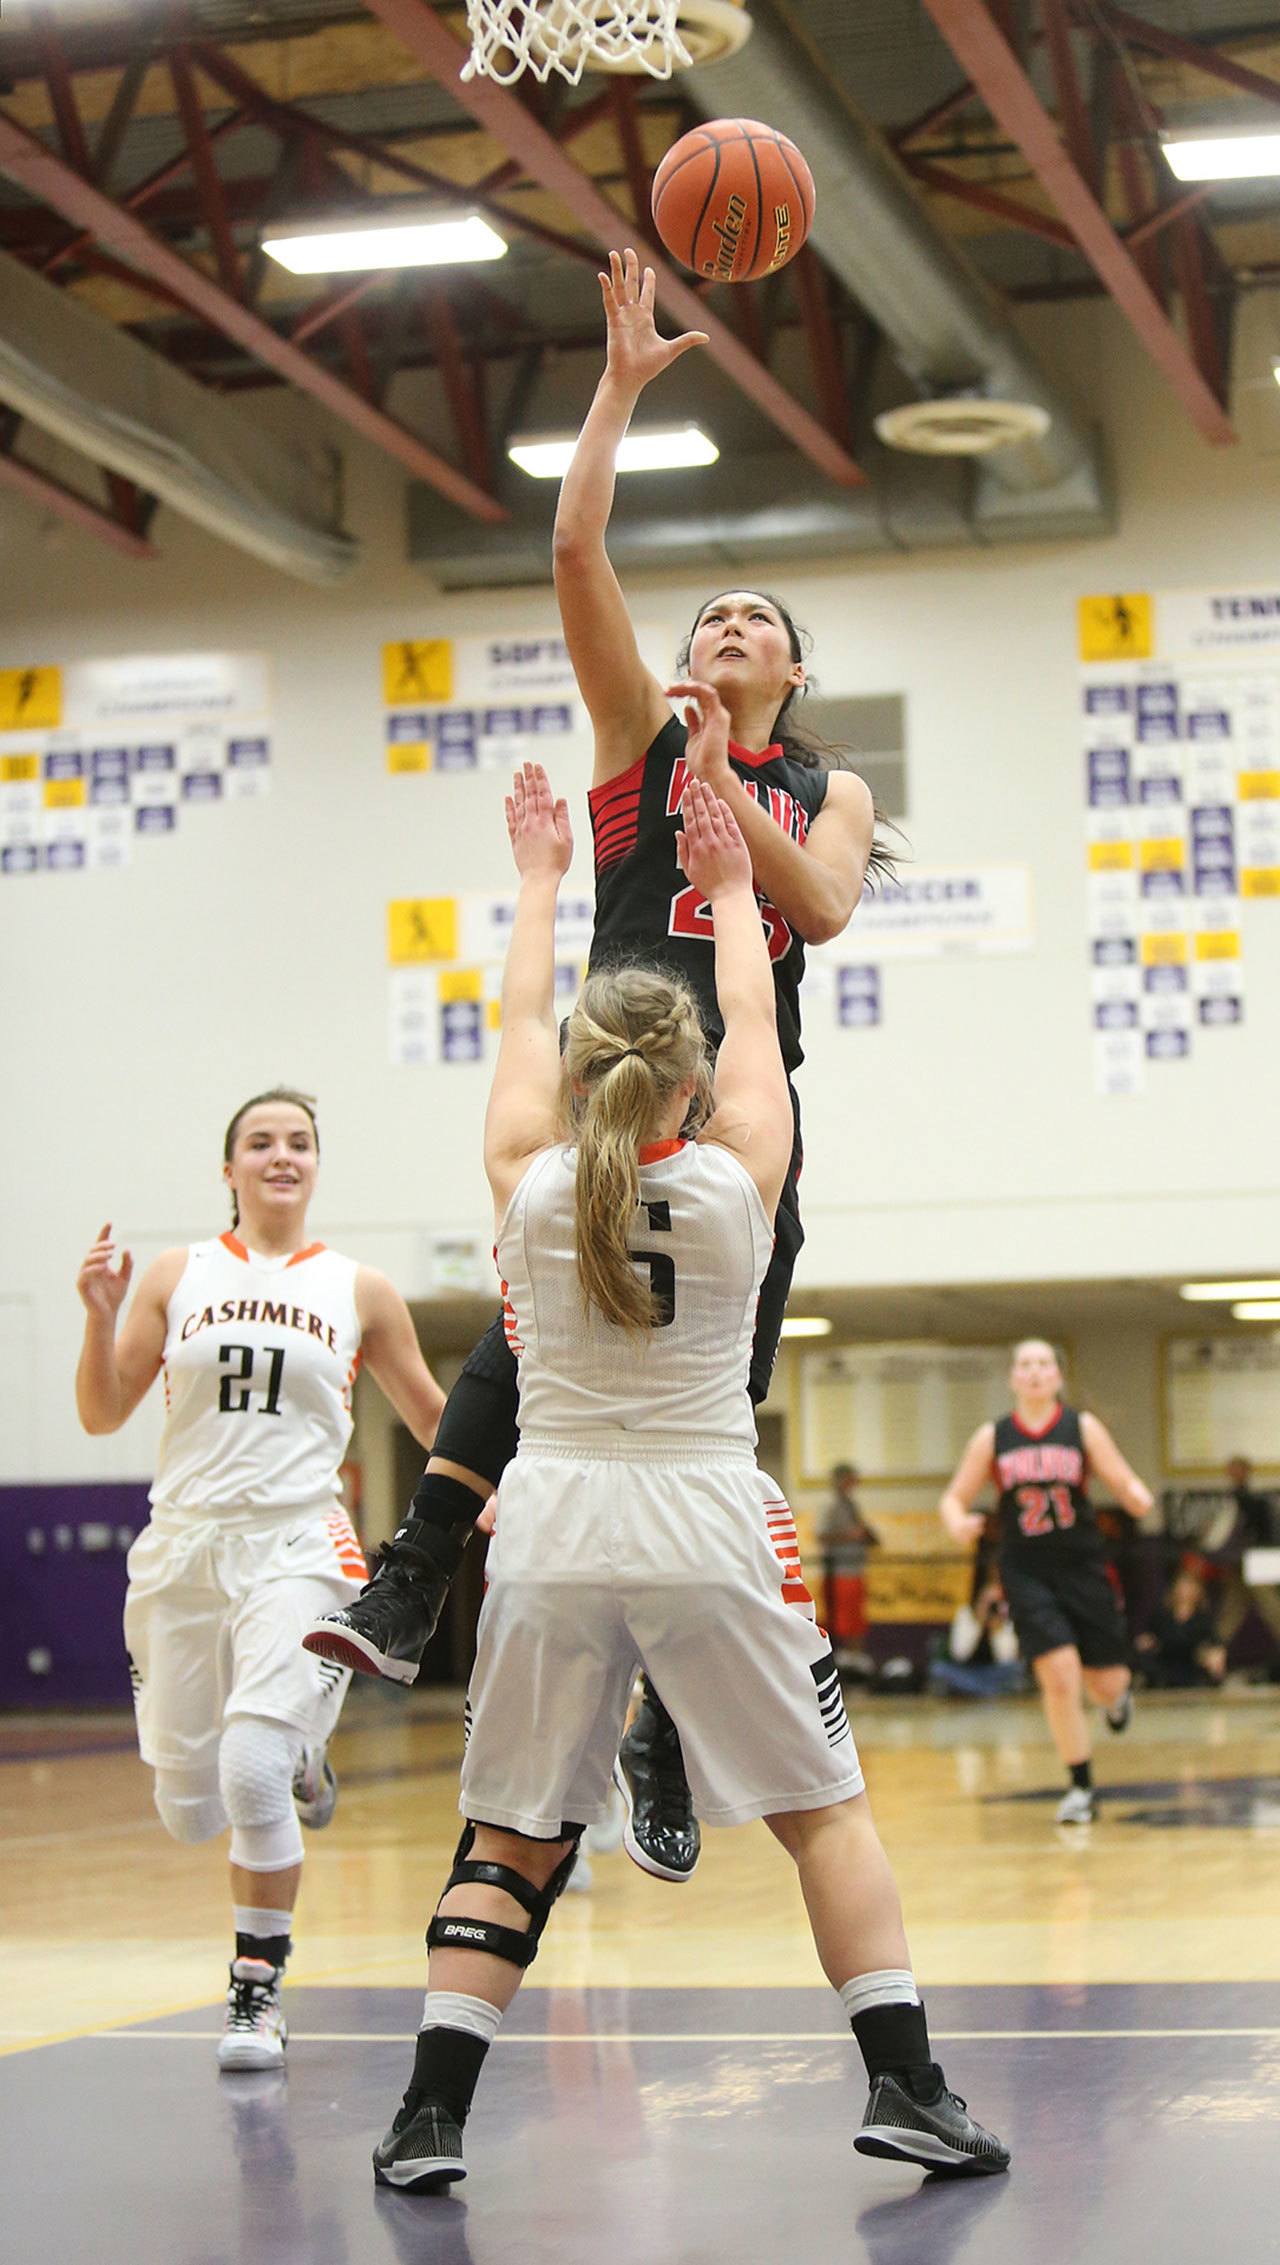 Coupeville’s Makana Stone, shown here scoring in the regional basketball tournament, graduated as one of the most celebrated athletes in school history. (Photo by John Fisken)